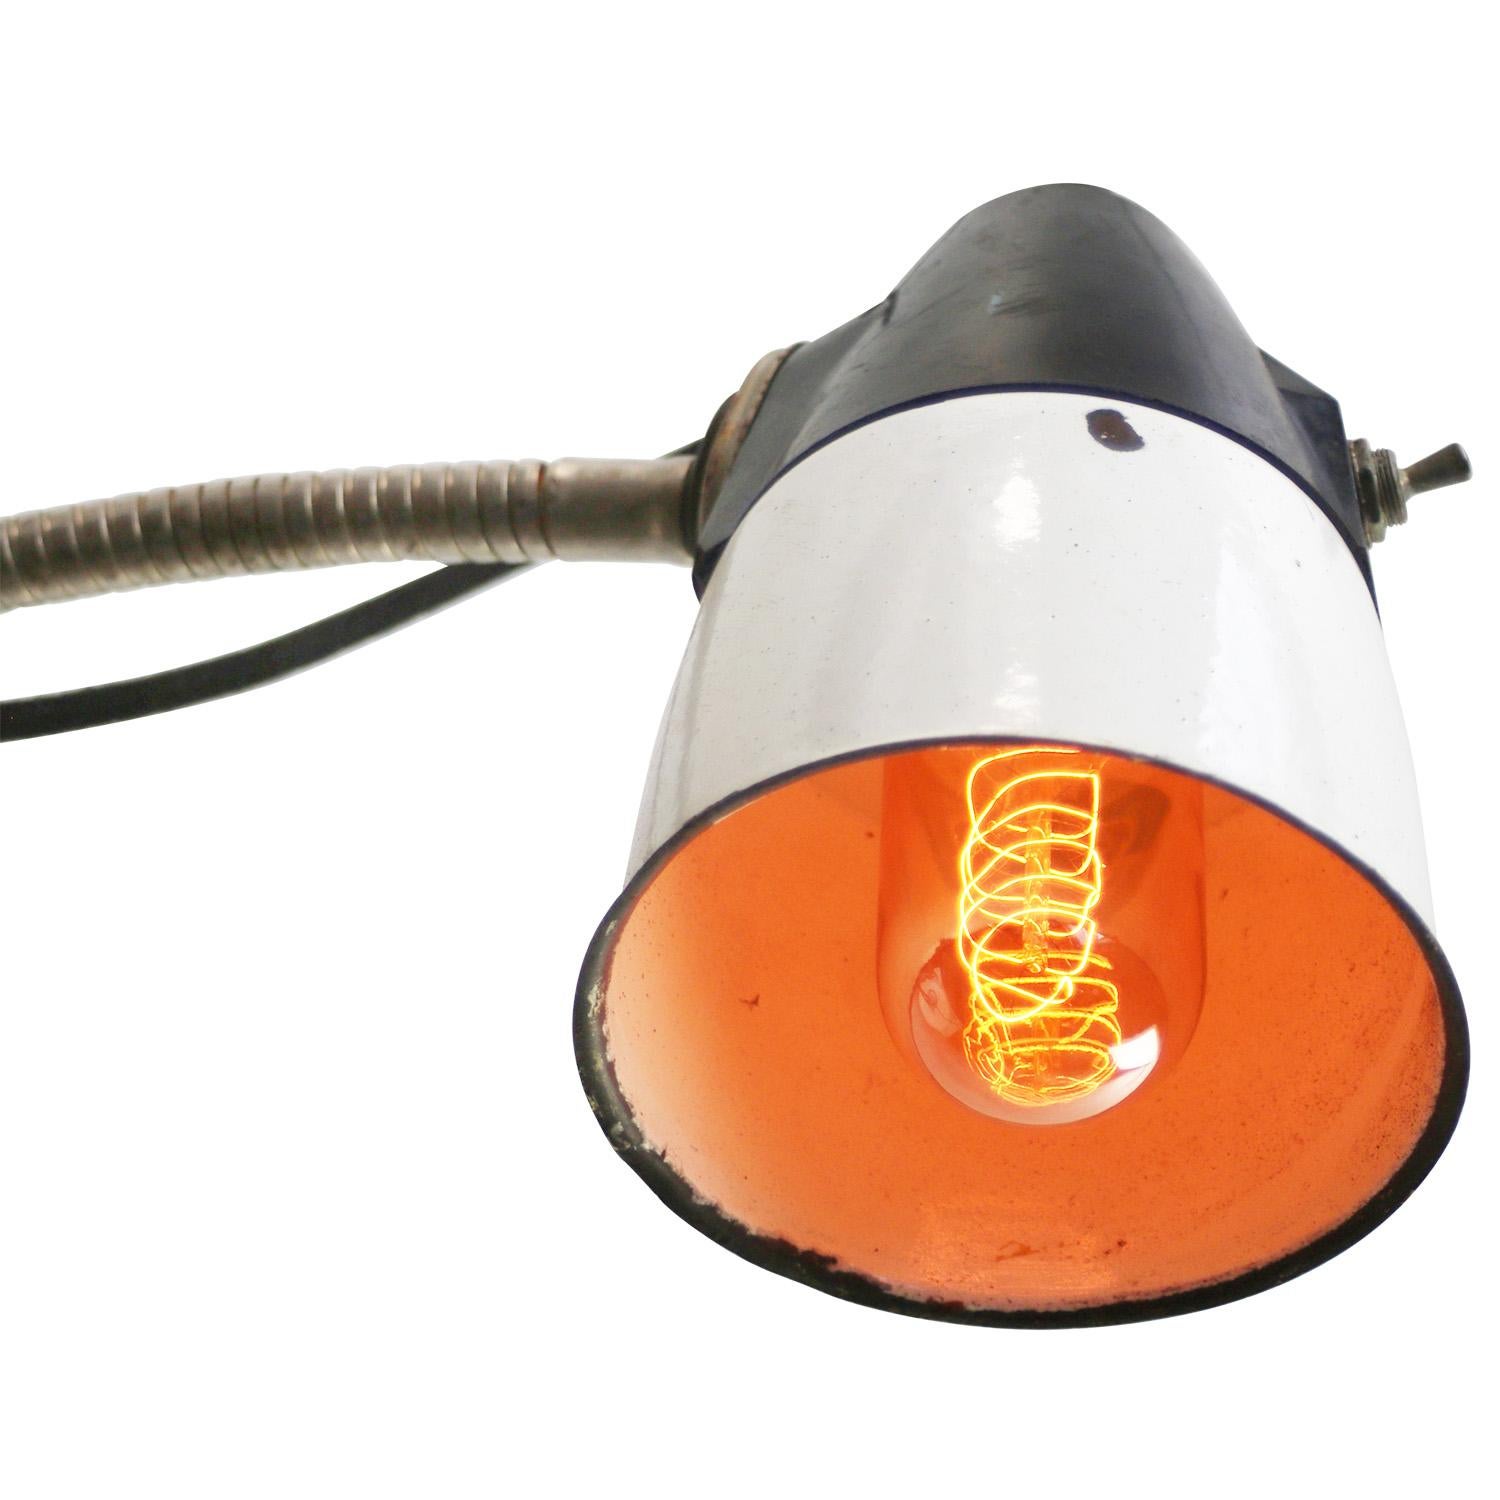 Metal work light with flexible gooseneck arm.
White enamel shade with Bakelite top
Switch in shade

size foot 9×9cm

Weight: 1.40 kg / 3.1 lb

Priced per individual item. All lamps have been made suitable by international standards for incandescent